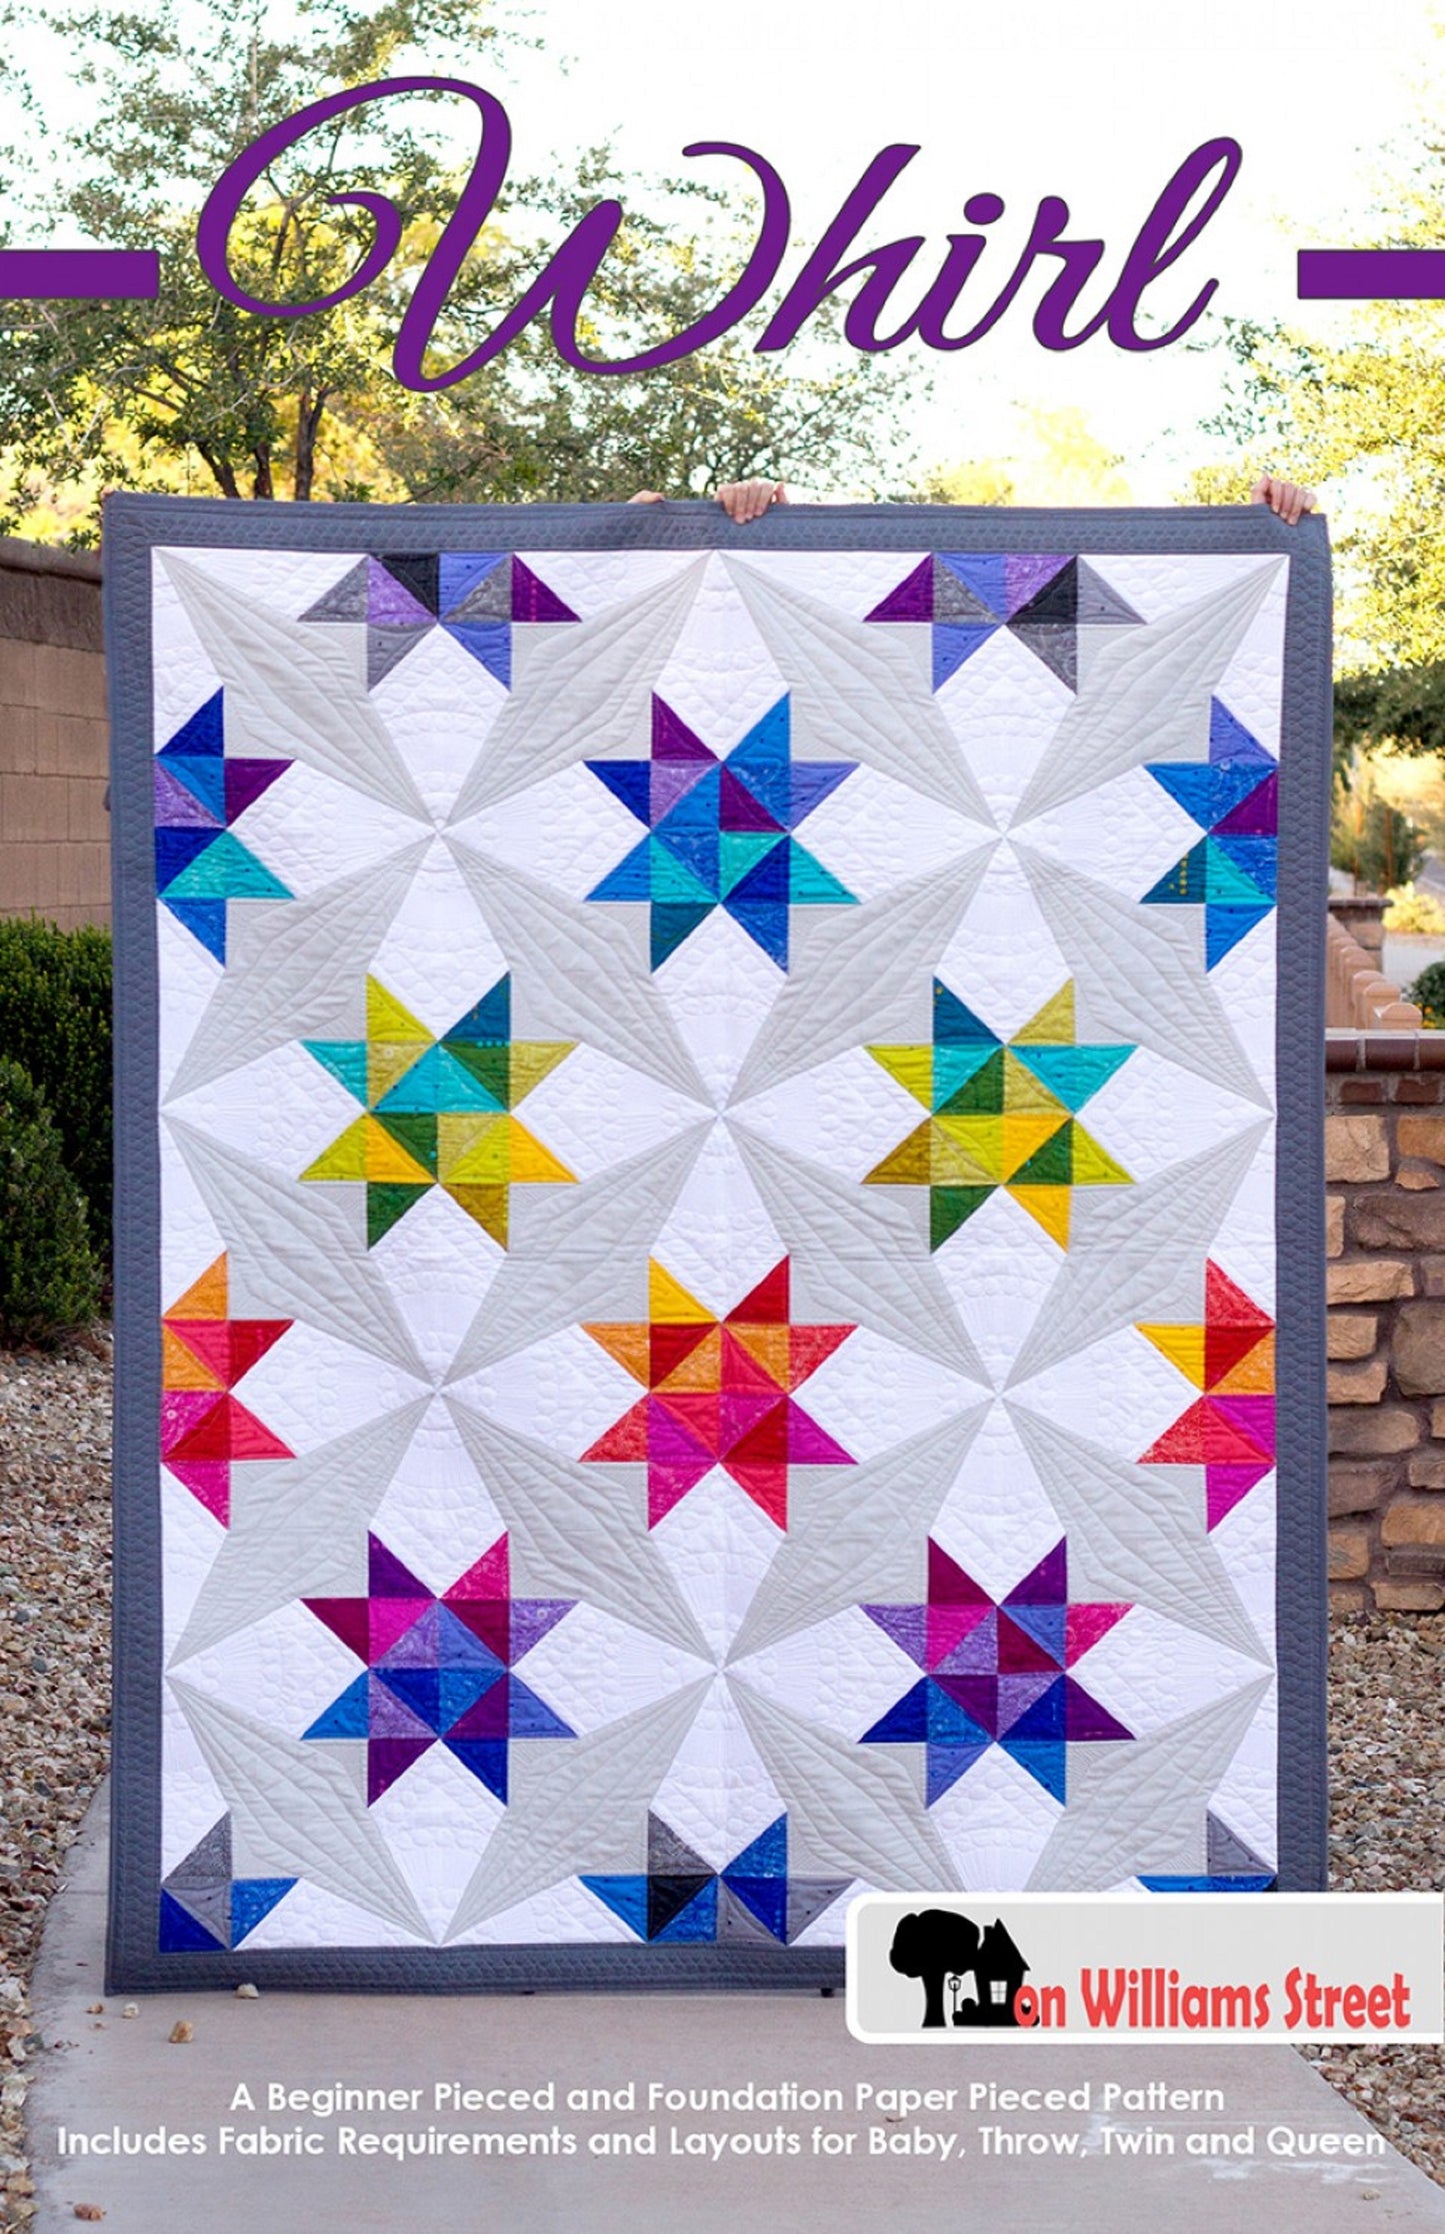 Whirl Quilt Pattern by On Williams Street